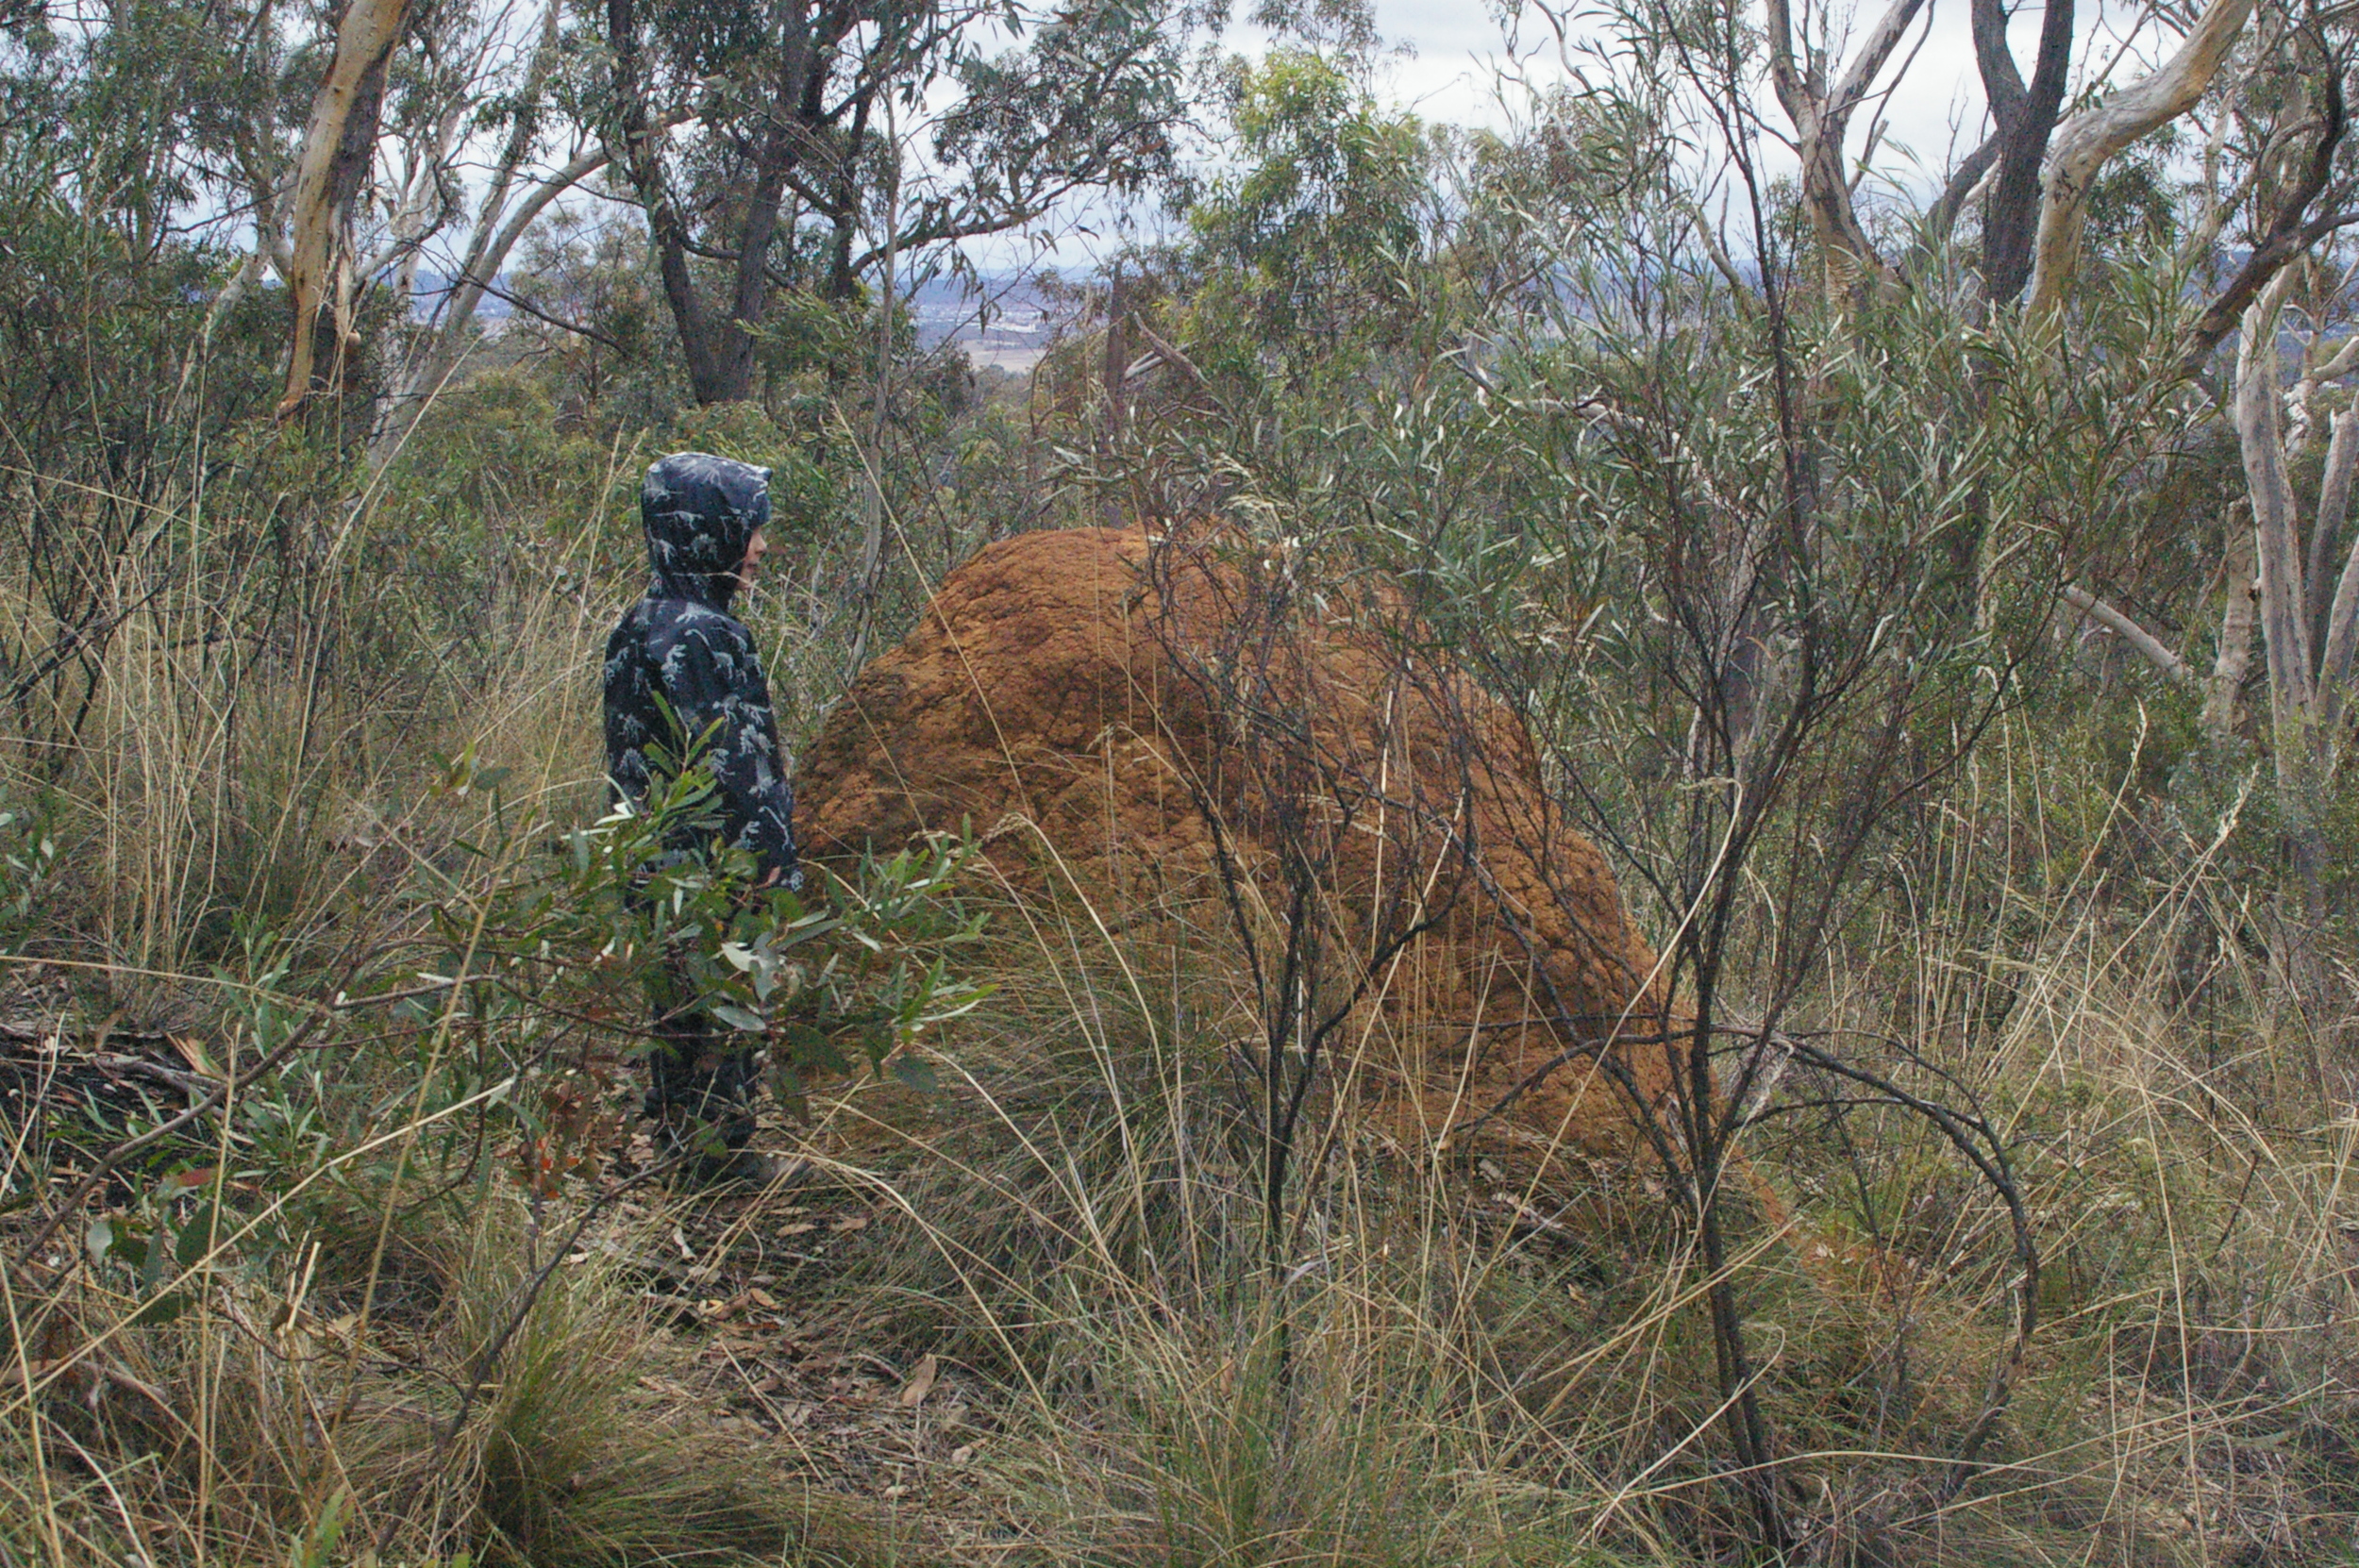  There are tonnes of huge termite mounds. 